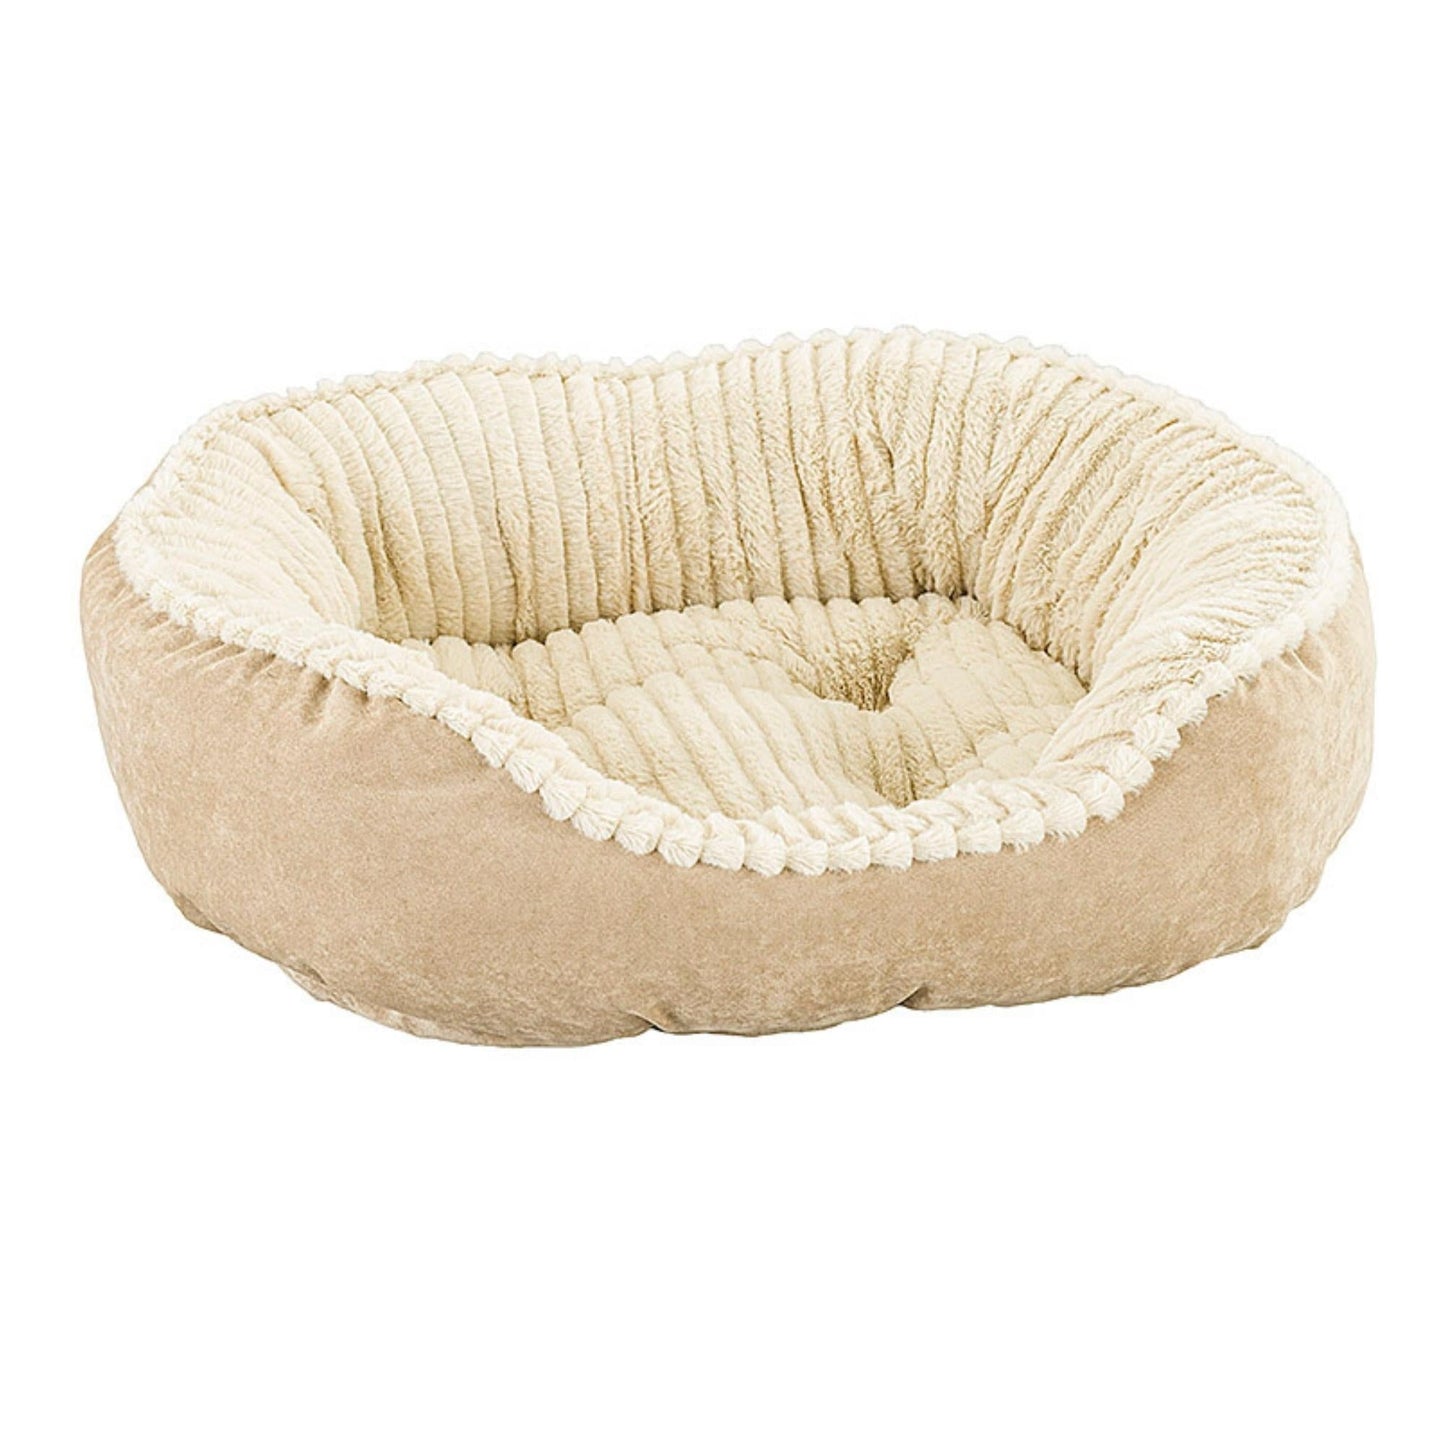 Ethical Pet Sleep Zone Carved Plush 32" Tan